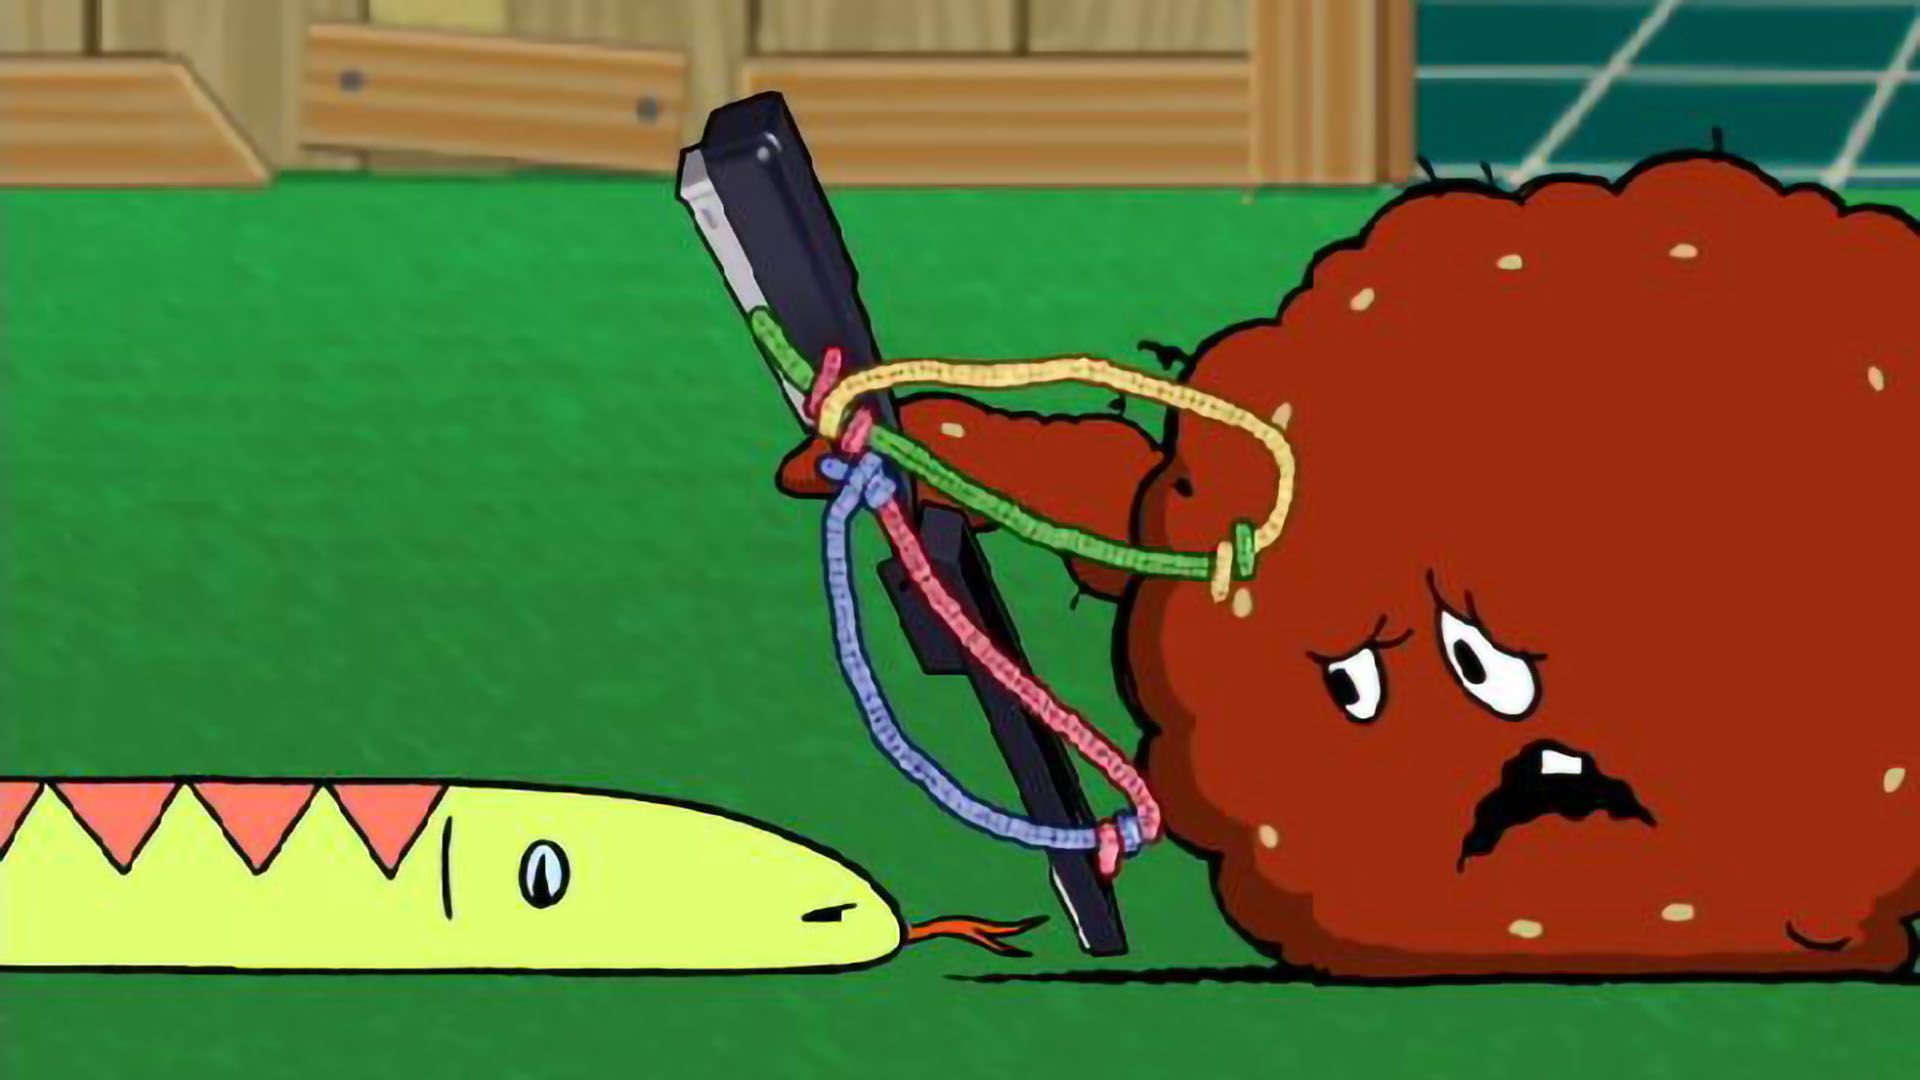 Kidneping Xxxvideo - Watch Aqua Teen Hunger Force from Adult Swim